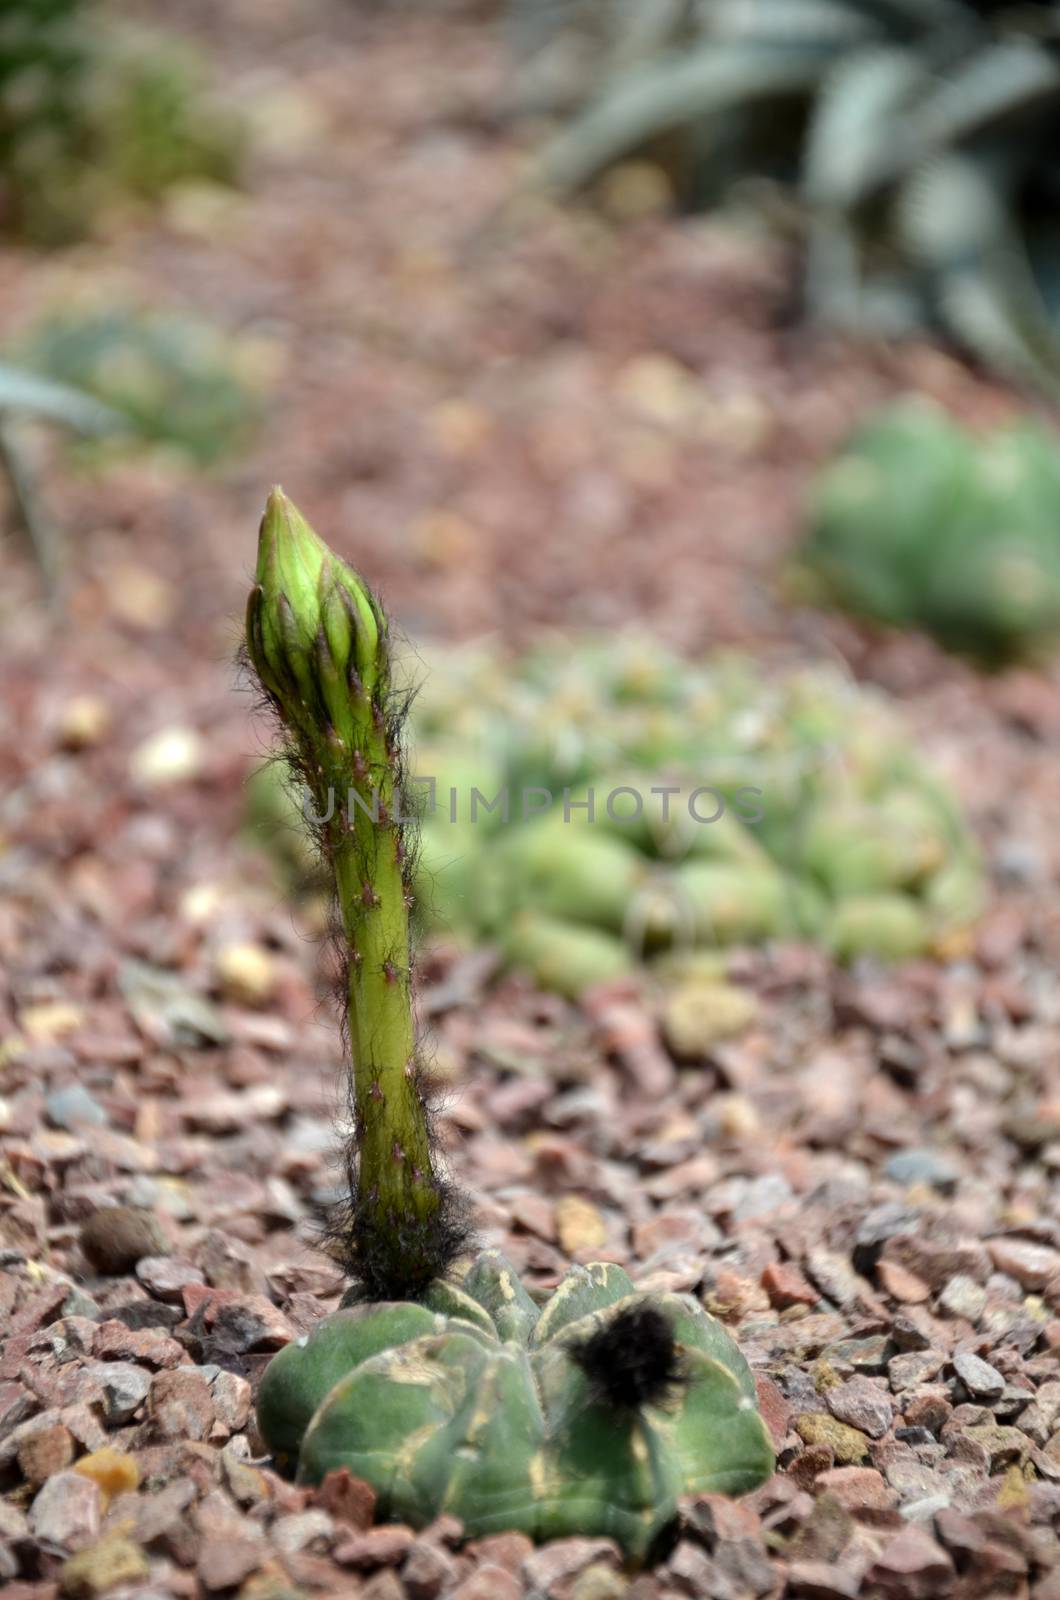 Budding Gymnocalycium cactus flower by tang90246